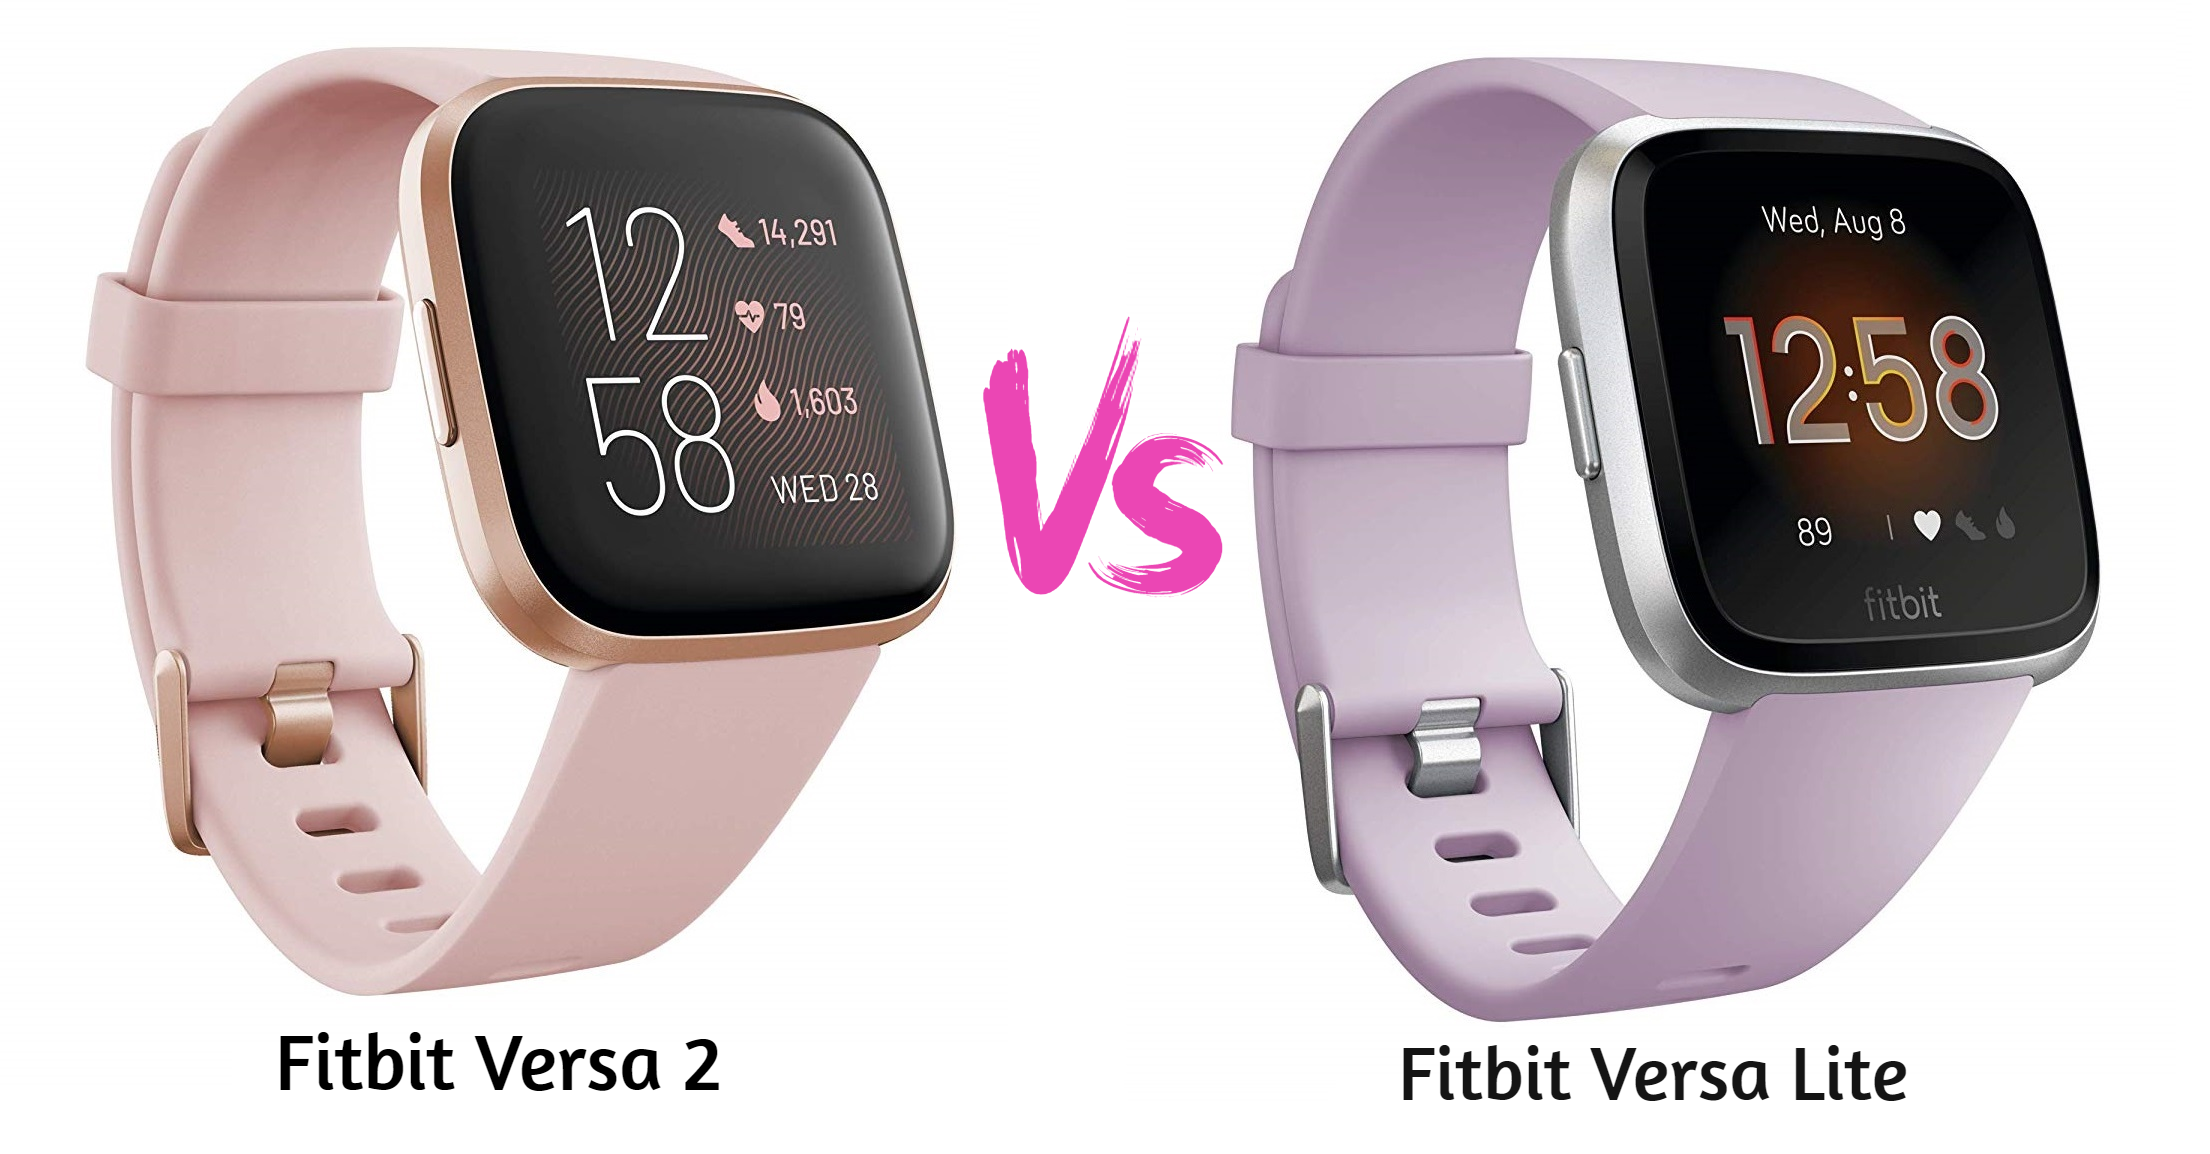 Difference between Fitbit Versa Lite and Versa 2